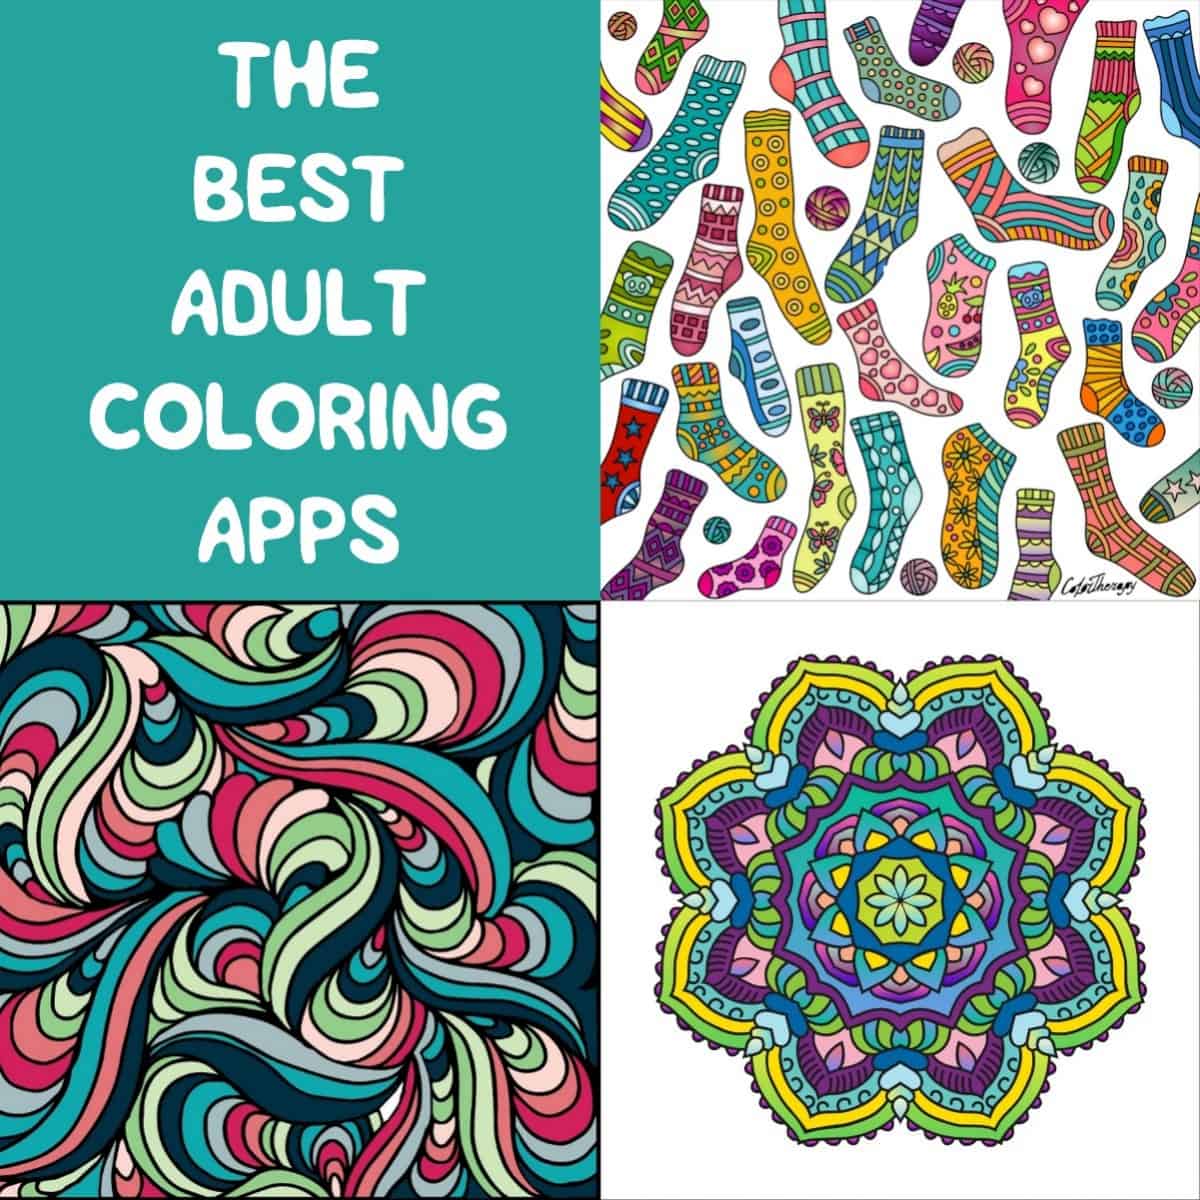 The Best Adult Coloring Apps   diycandy.com